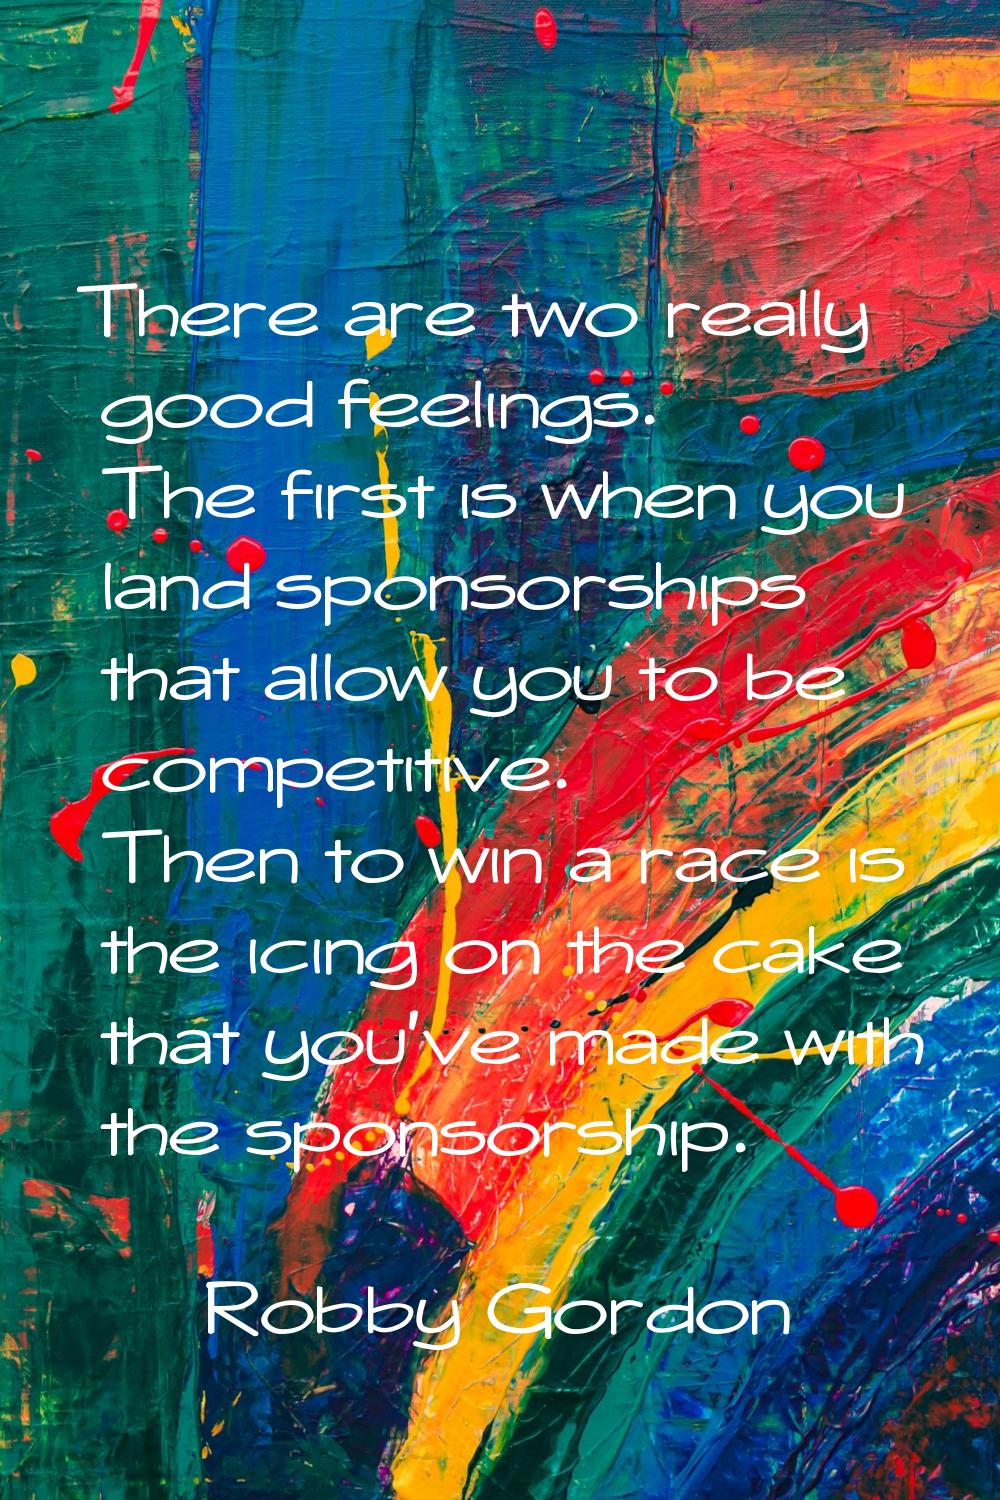 There are two really good feelings. The first is when you land sponsorships that allow you to be co